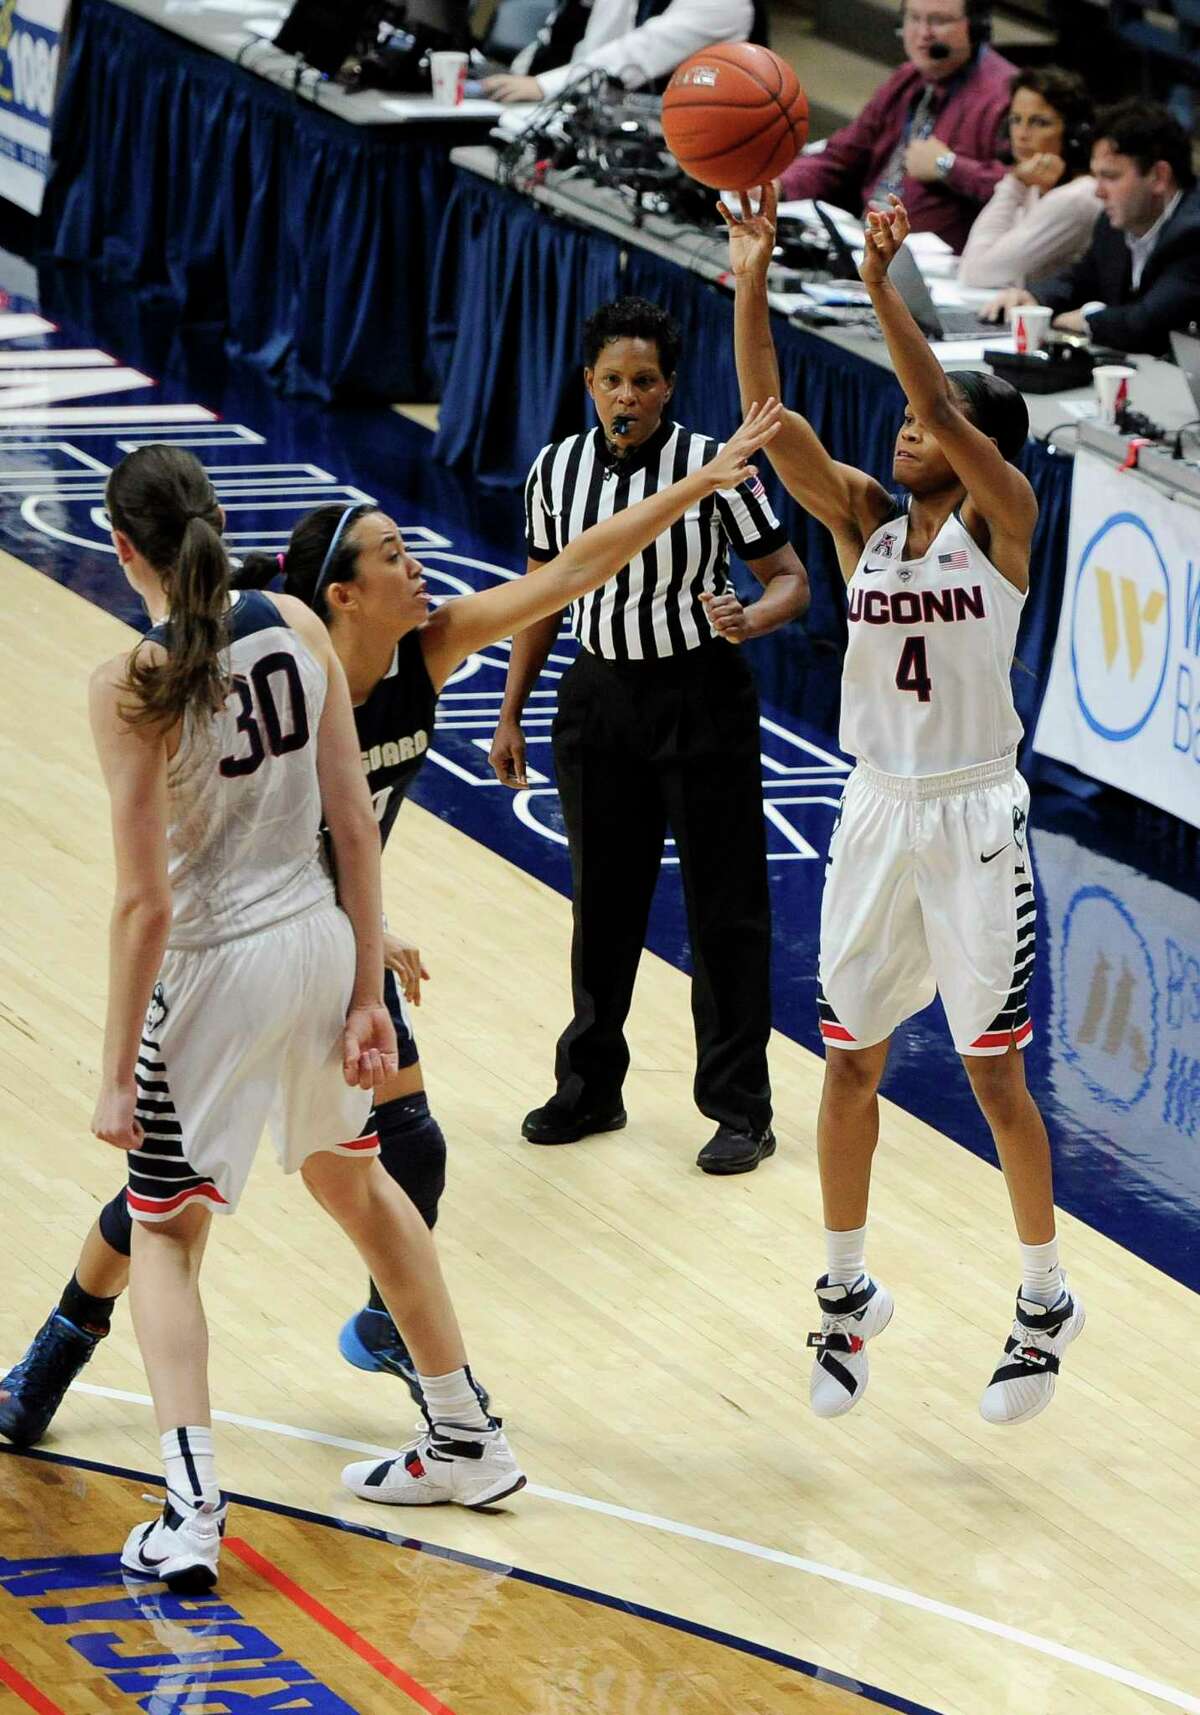 UConn’s Moriah Jefferson, right, shoots a 3-point basket against Vanguard’s Maya Kennedy as Breanna Stewart, left, defends during the second half Sunday.